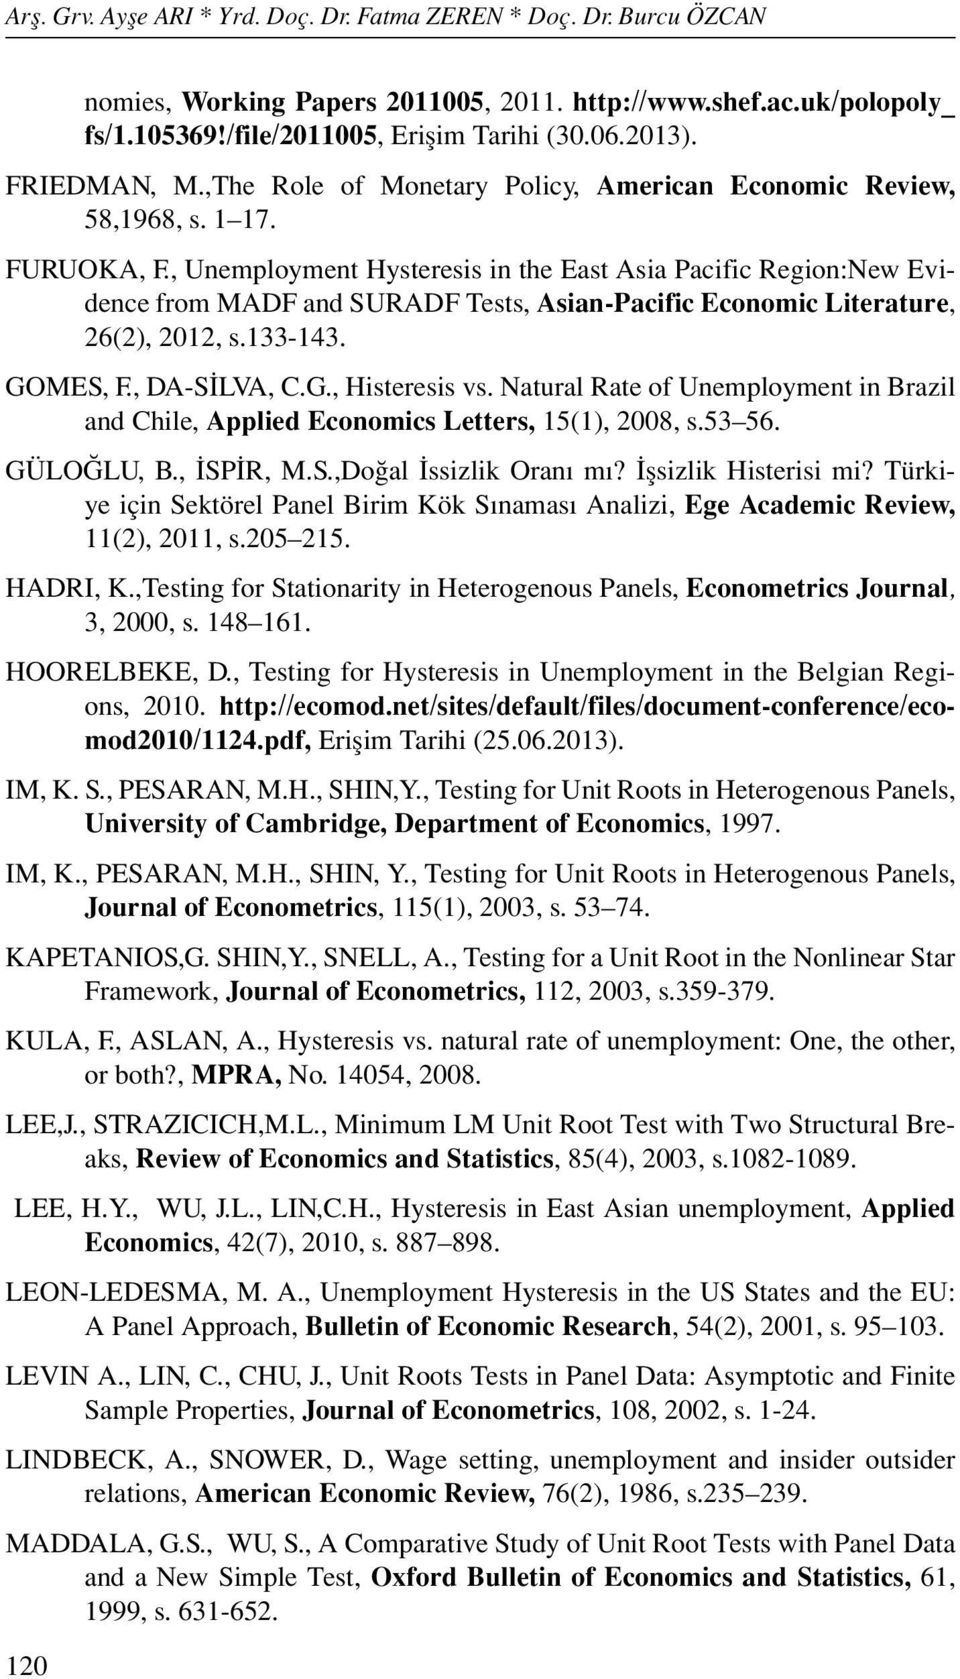 , Unemployment Hysteresis in the East Asia Pacific Region:New Evidence from MADF and SURADF Tests, Asian-Pacific Economic Literature, 26(2), 2012, s.133-143. GOMES, F., DA-SİLVA, C.G., Histeresis vs.